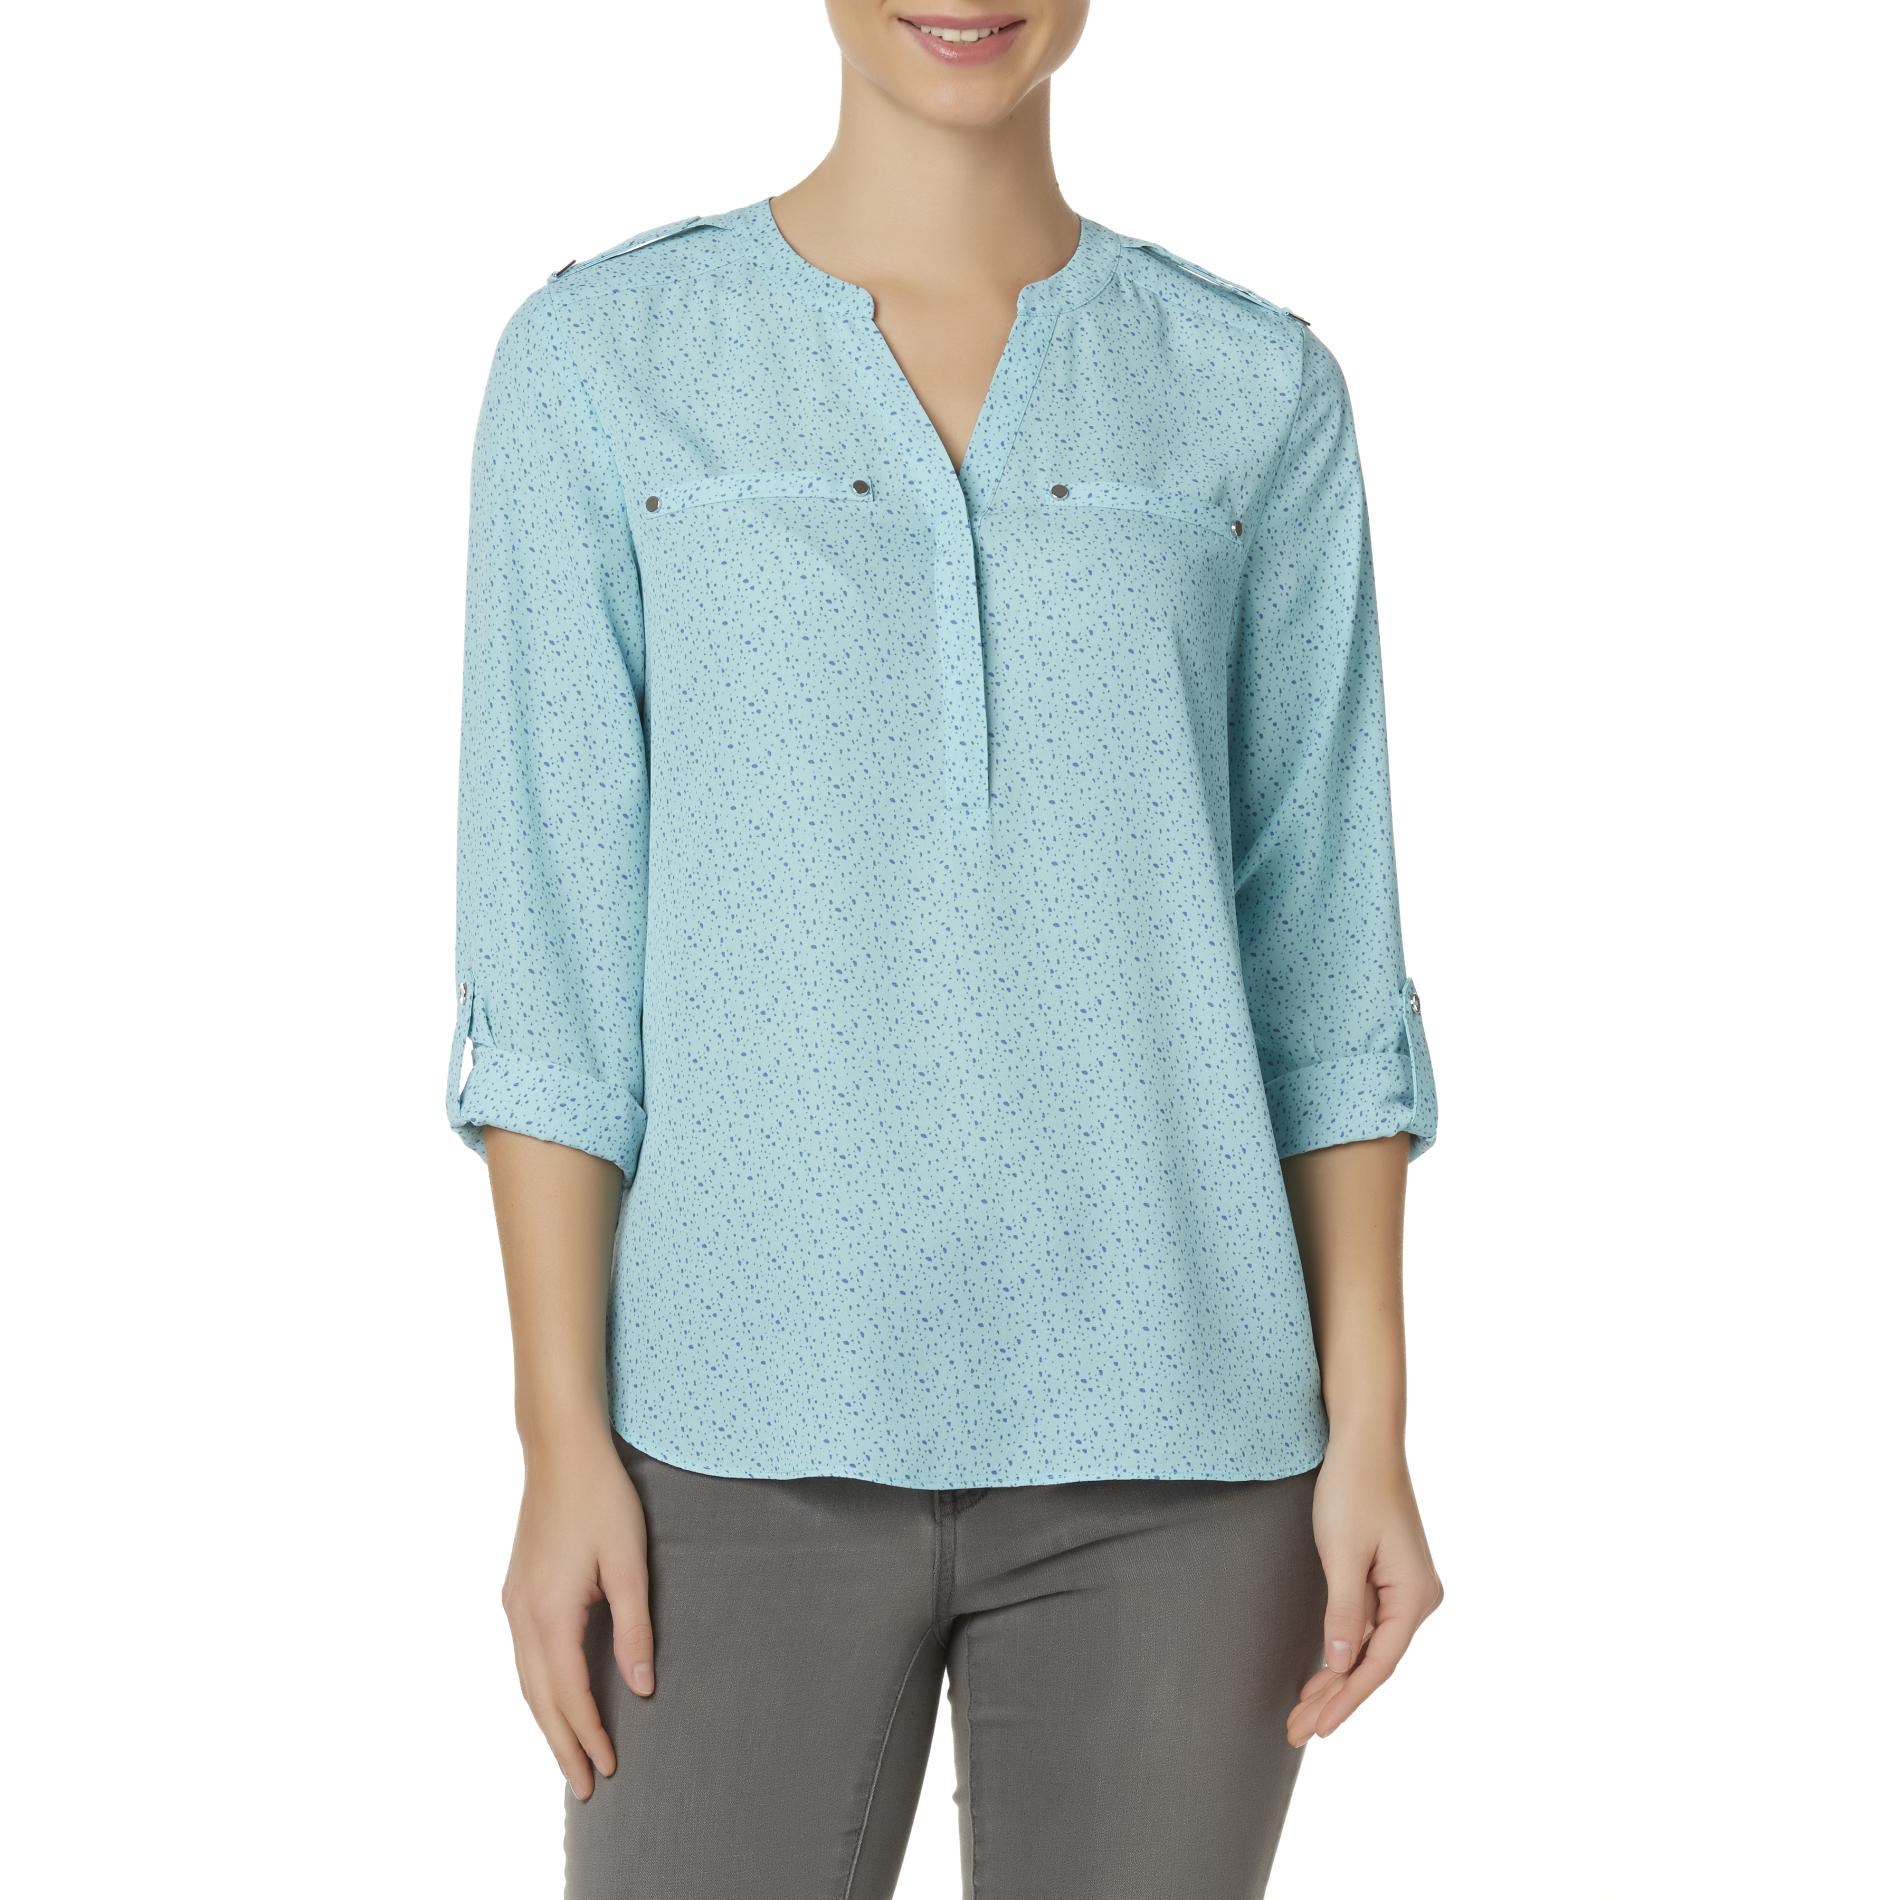 Simply Styled Women's Utility Blouse - Dots